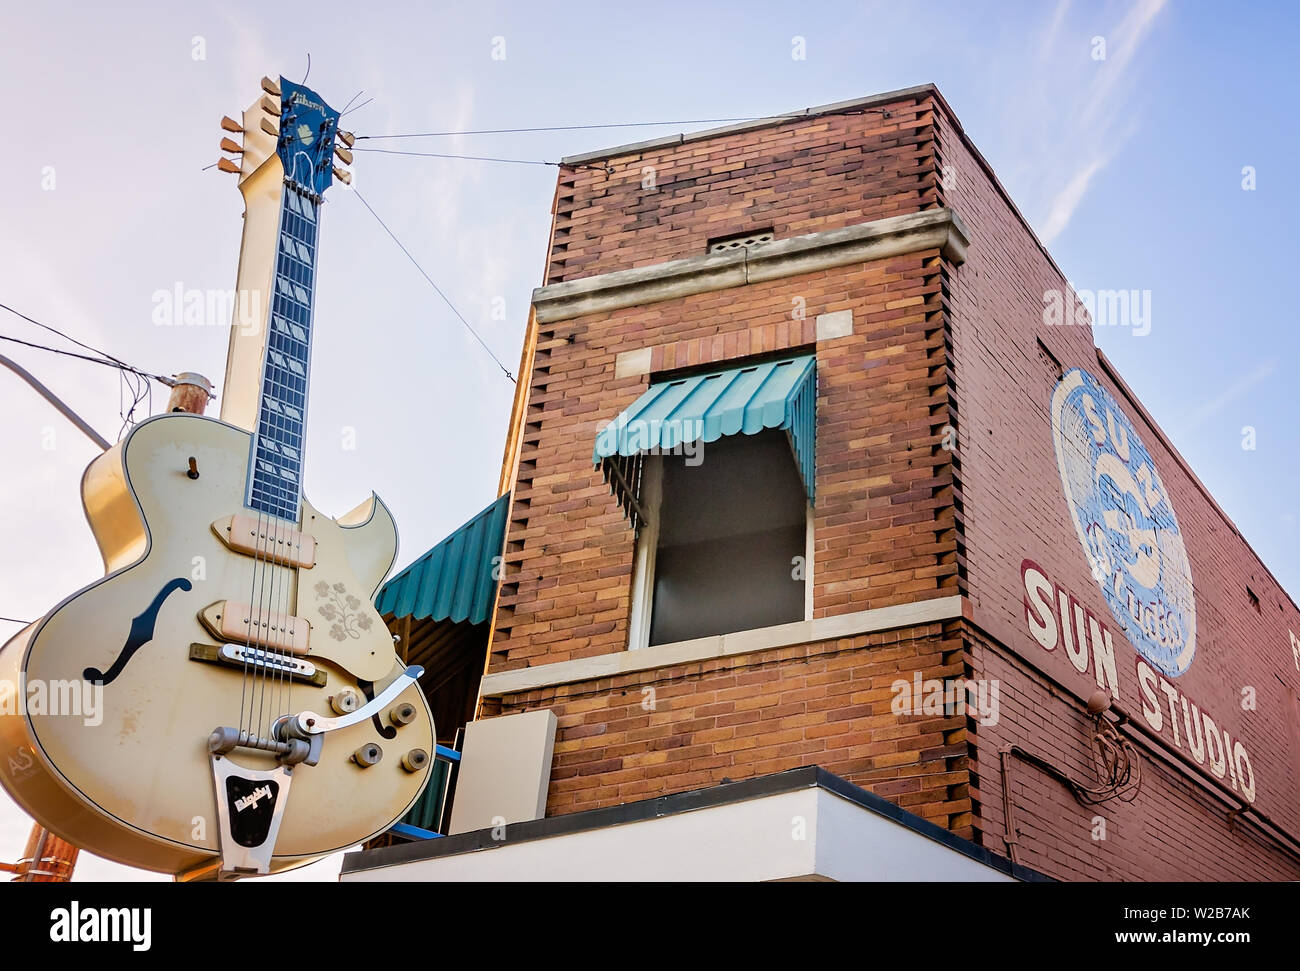 The sun sets on Sun Studio, Sept. 6, 2015. The recording studio and record label were made famous by singers like Elvis Presley and Johnny Cash. Stock Photo